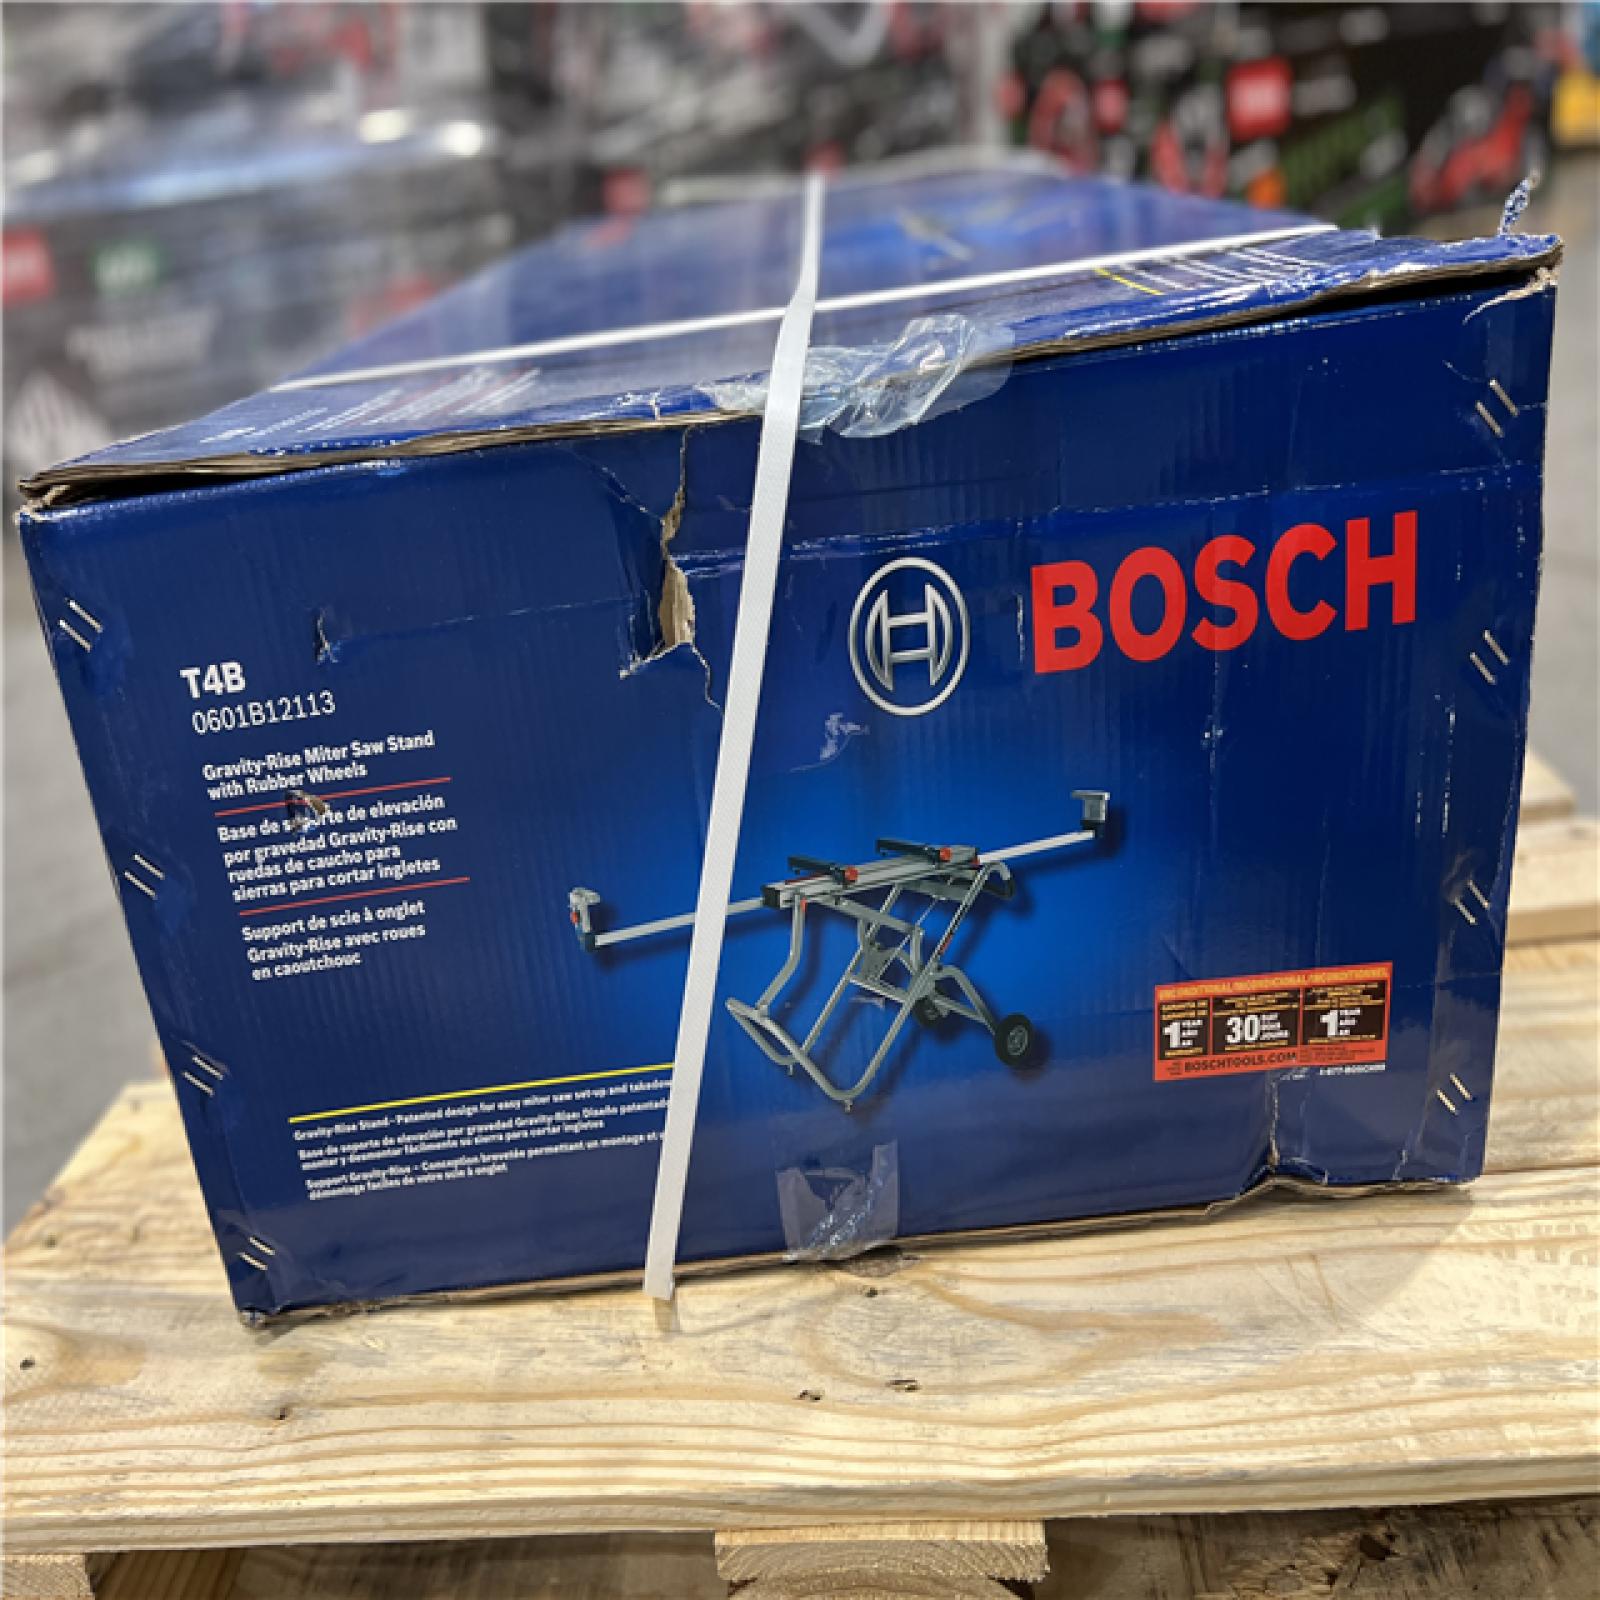 DALLAS LOCATION - Bosch Portable Folding Gravity Rise Miter Saw Stand with Wheels